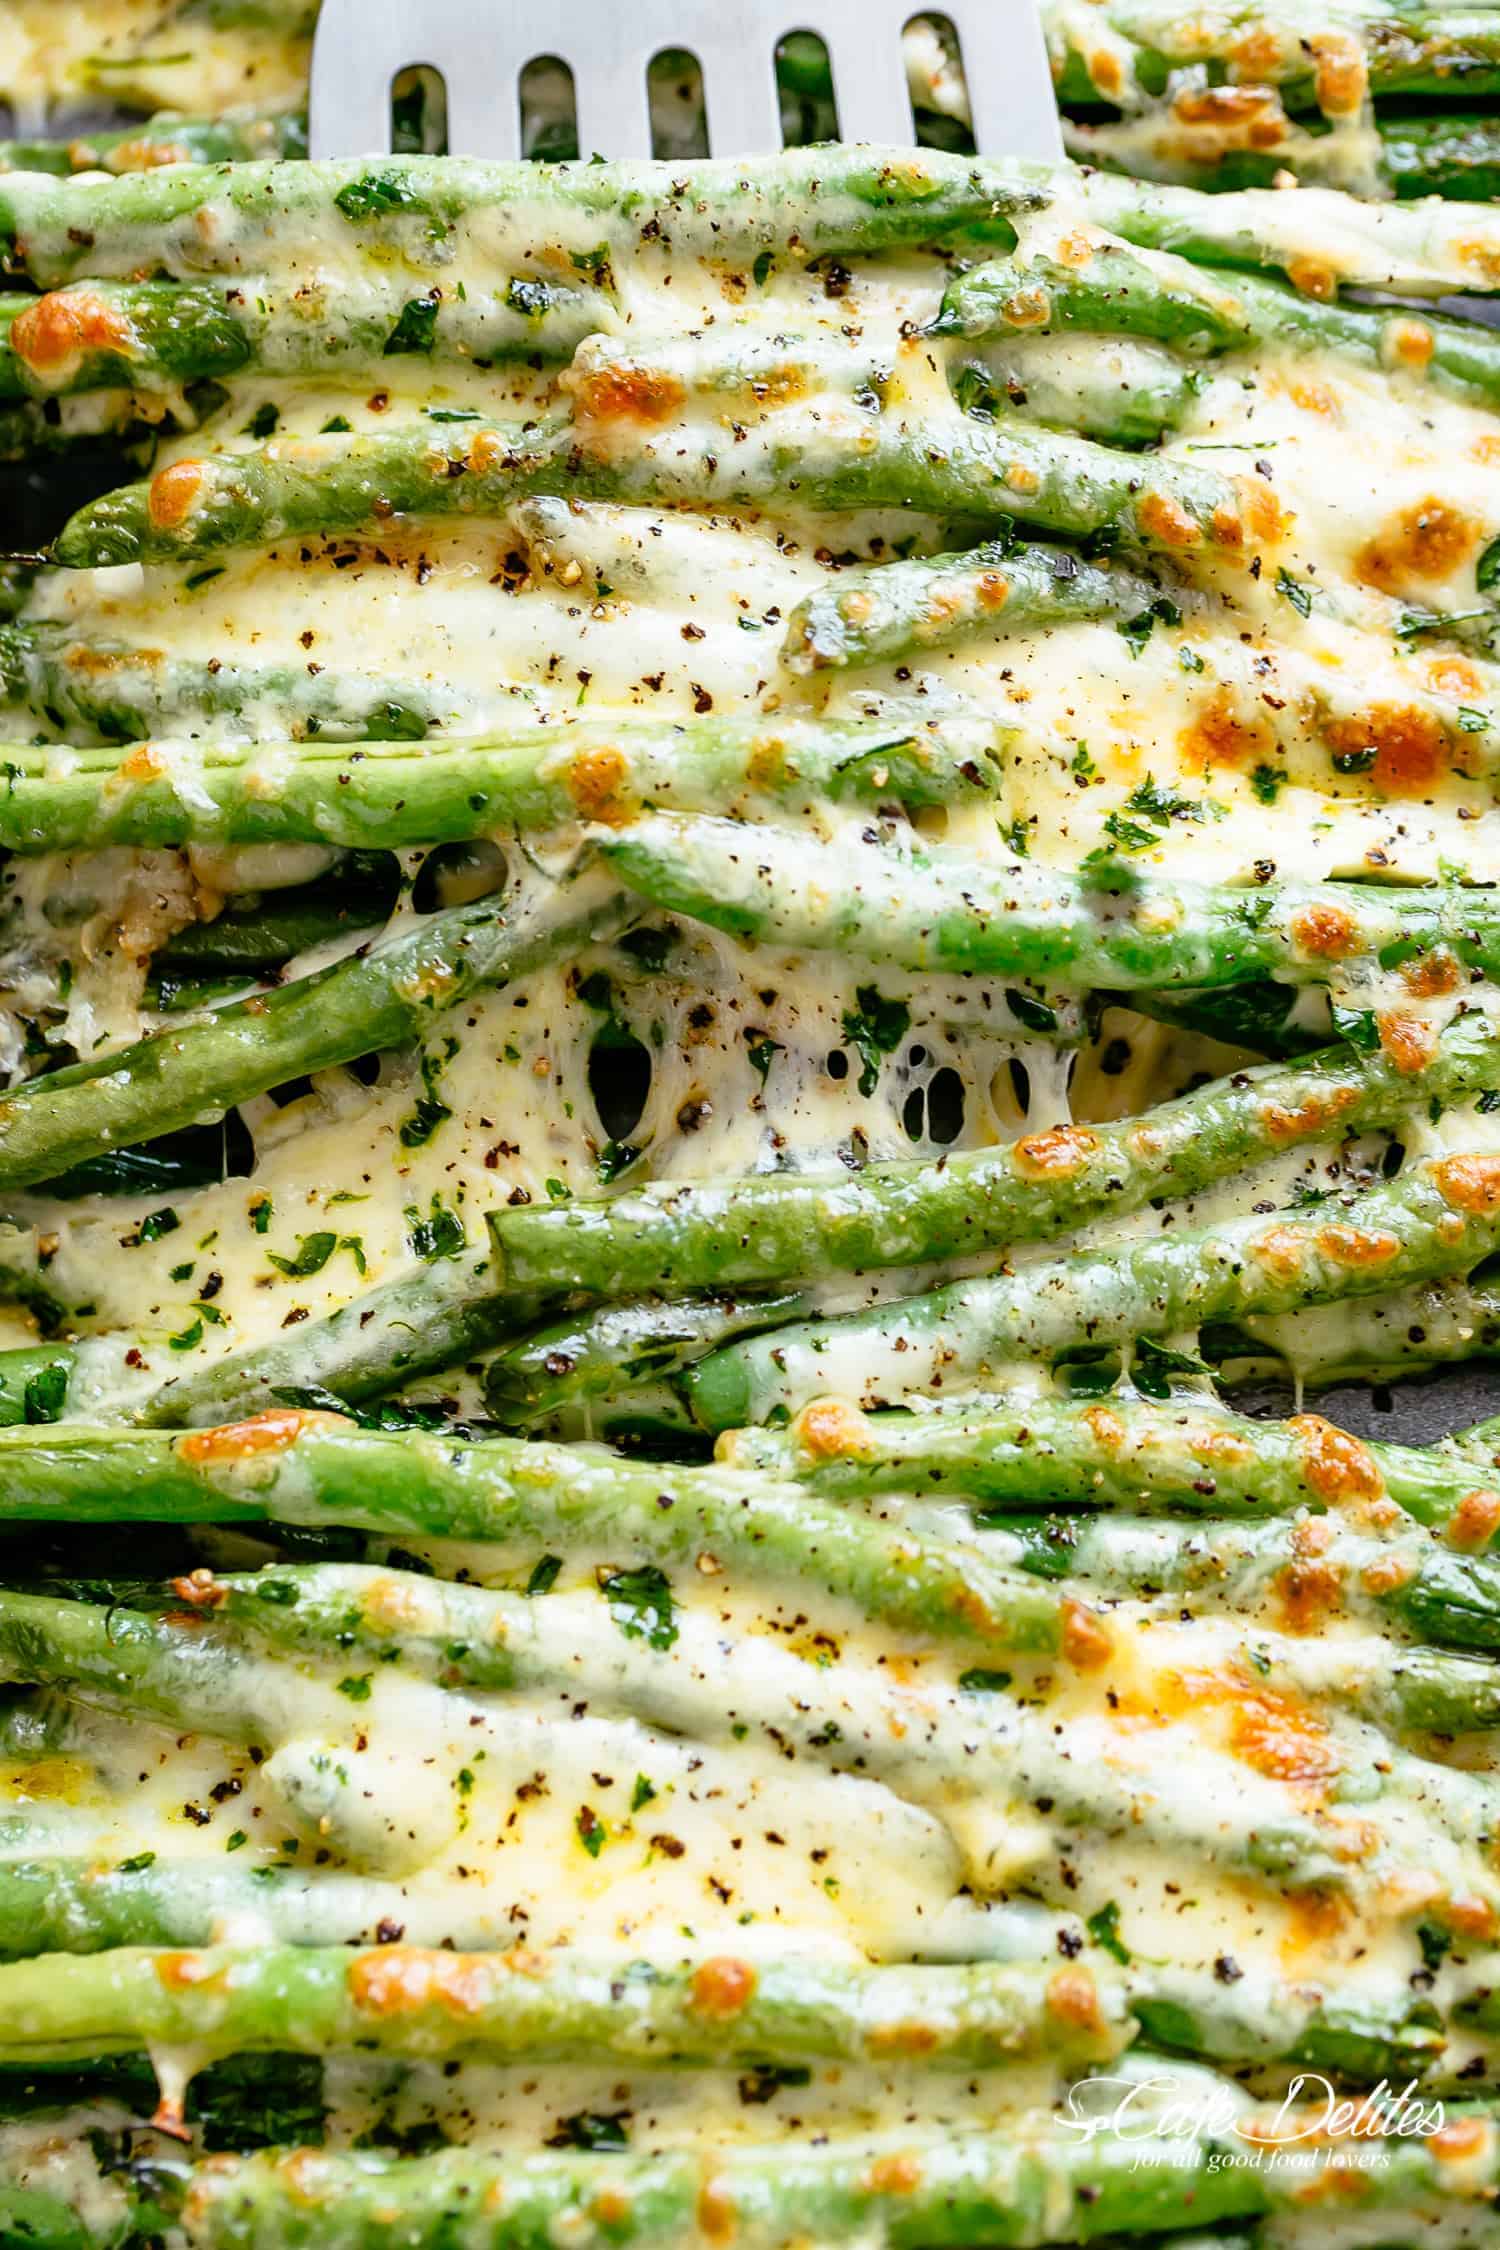 Melted cheese on roasted green beans